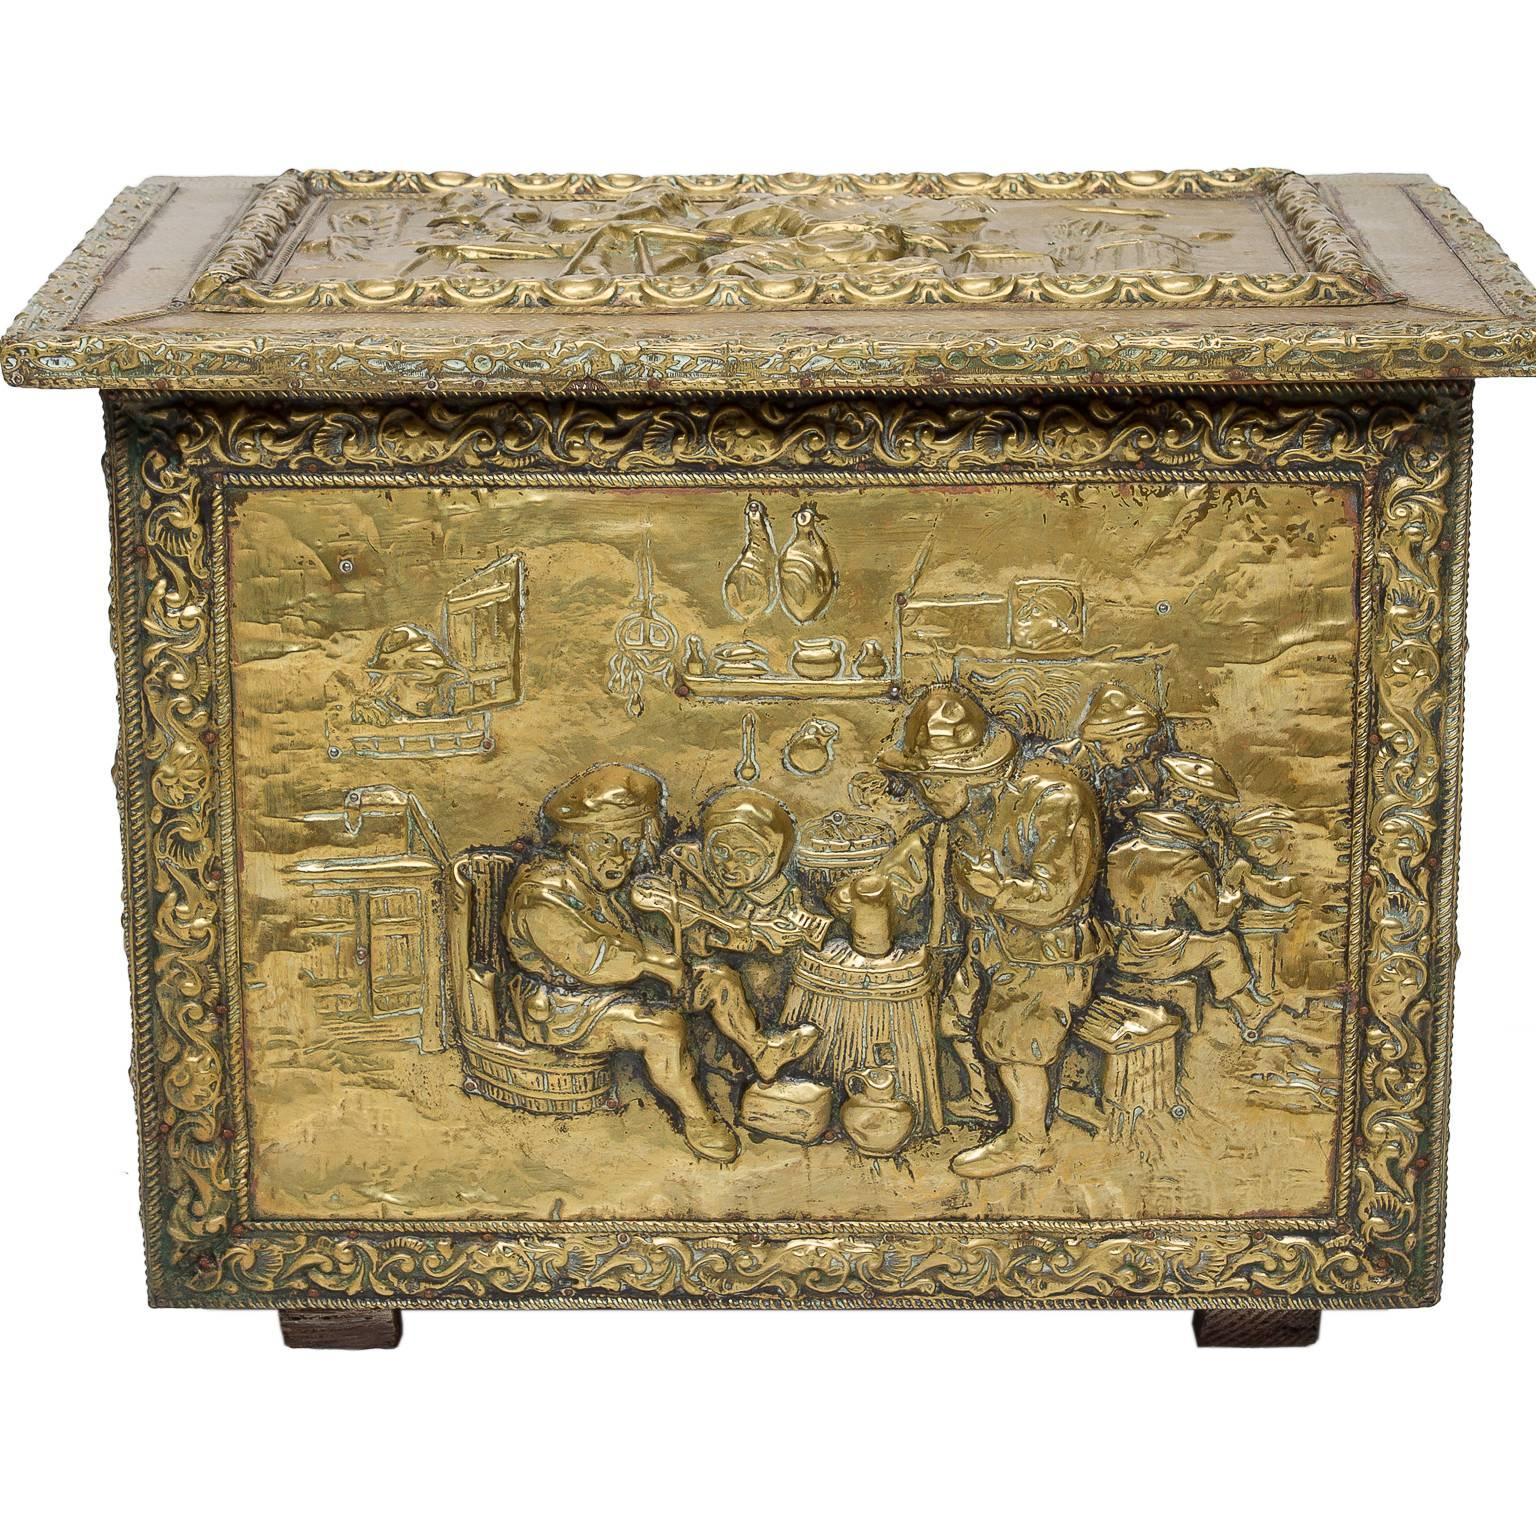 An English brass fireside lift top box from the late 19th century. This sides and front are hammered and embossed with individual scenes. Very nice quality interior and people scenes. The brass has been polished throughout the years and holds a